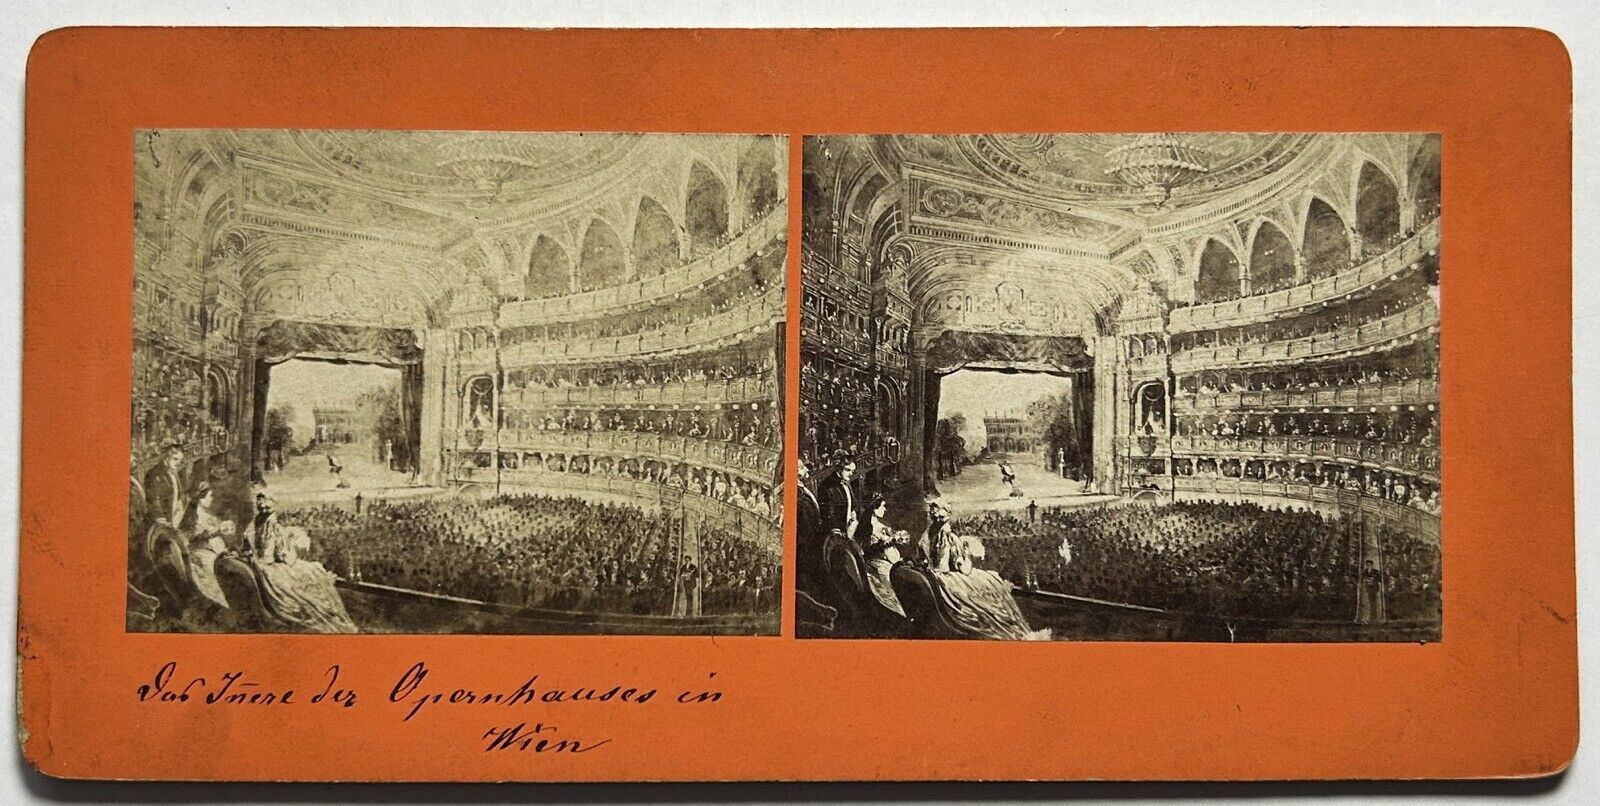 AUSTRIA Vienna Opera c1870 Photo Stereo After Painting by Angerer Vintage 